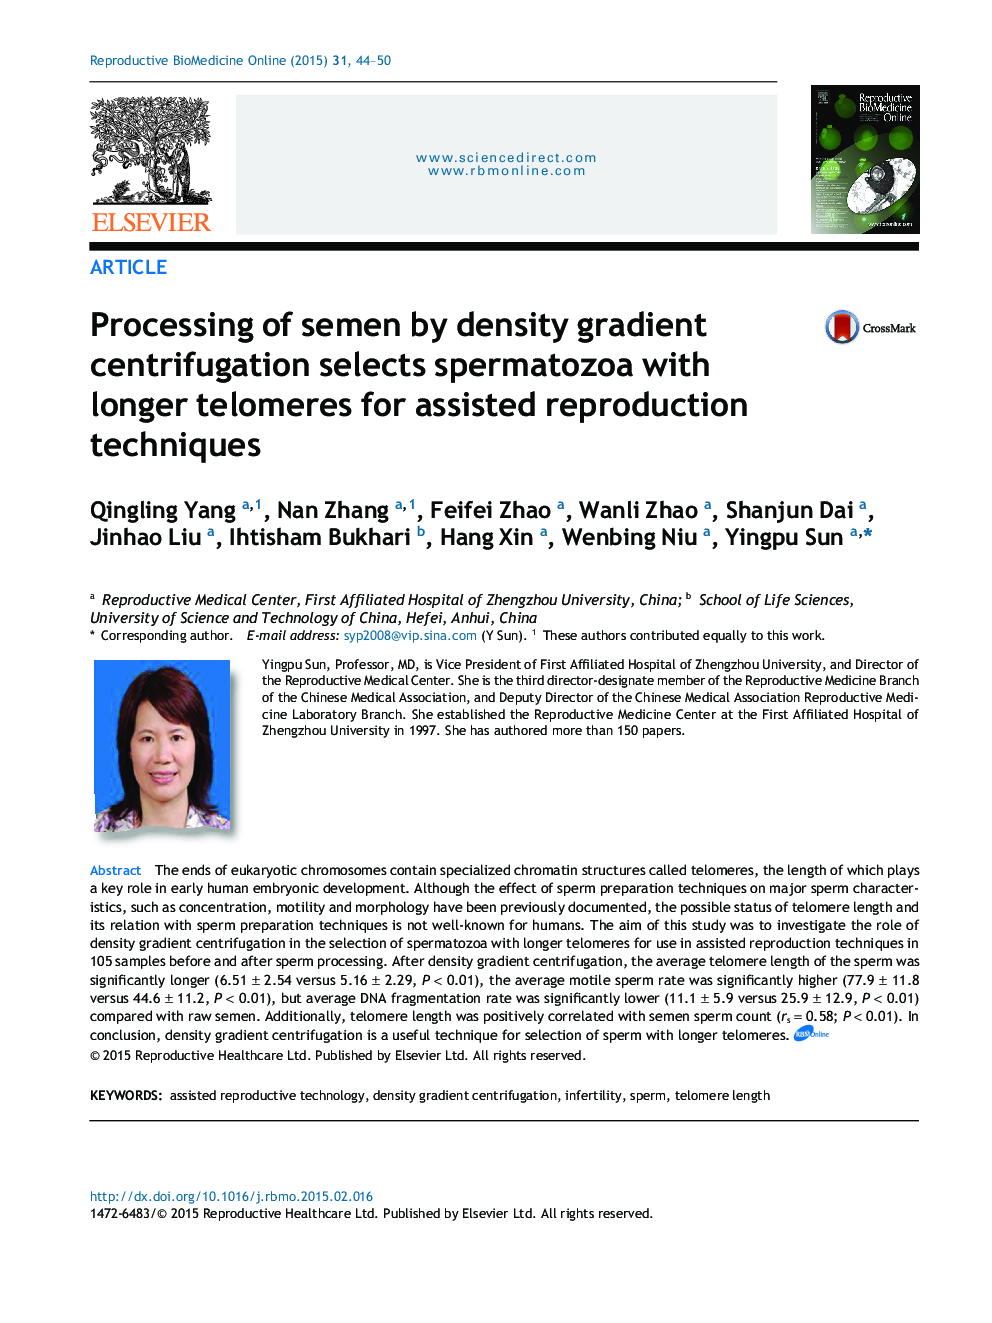 Processing of semen by density gradient centrifugation selects spermatozoa with longer telomeres for assisted reproduction techniques